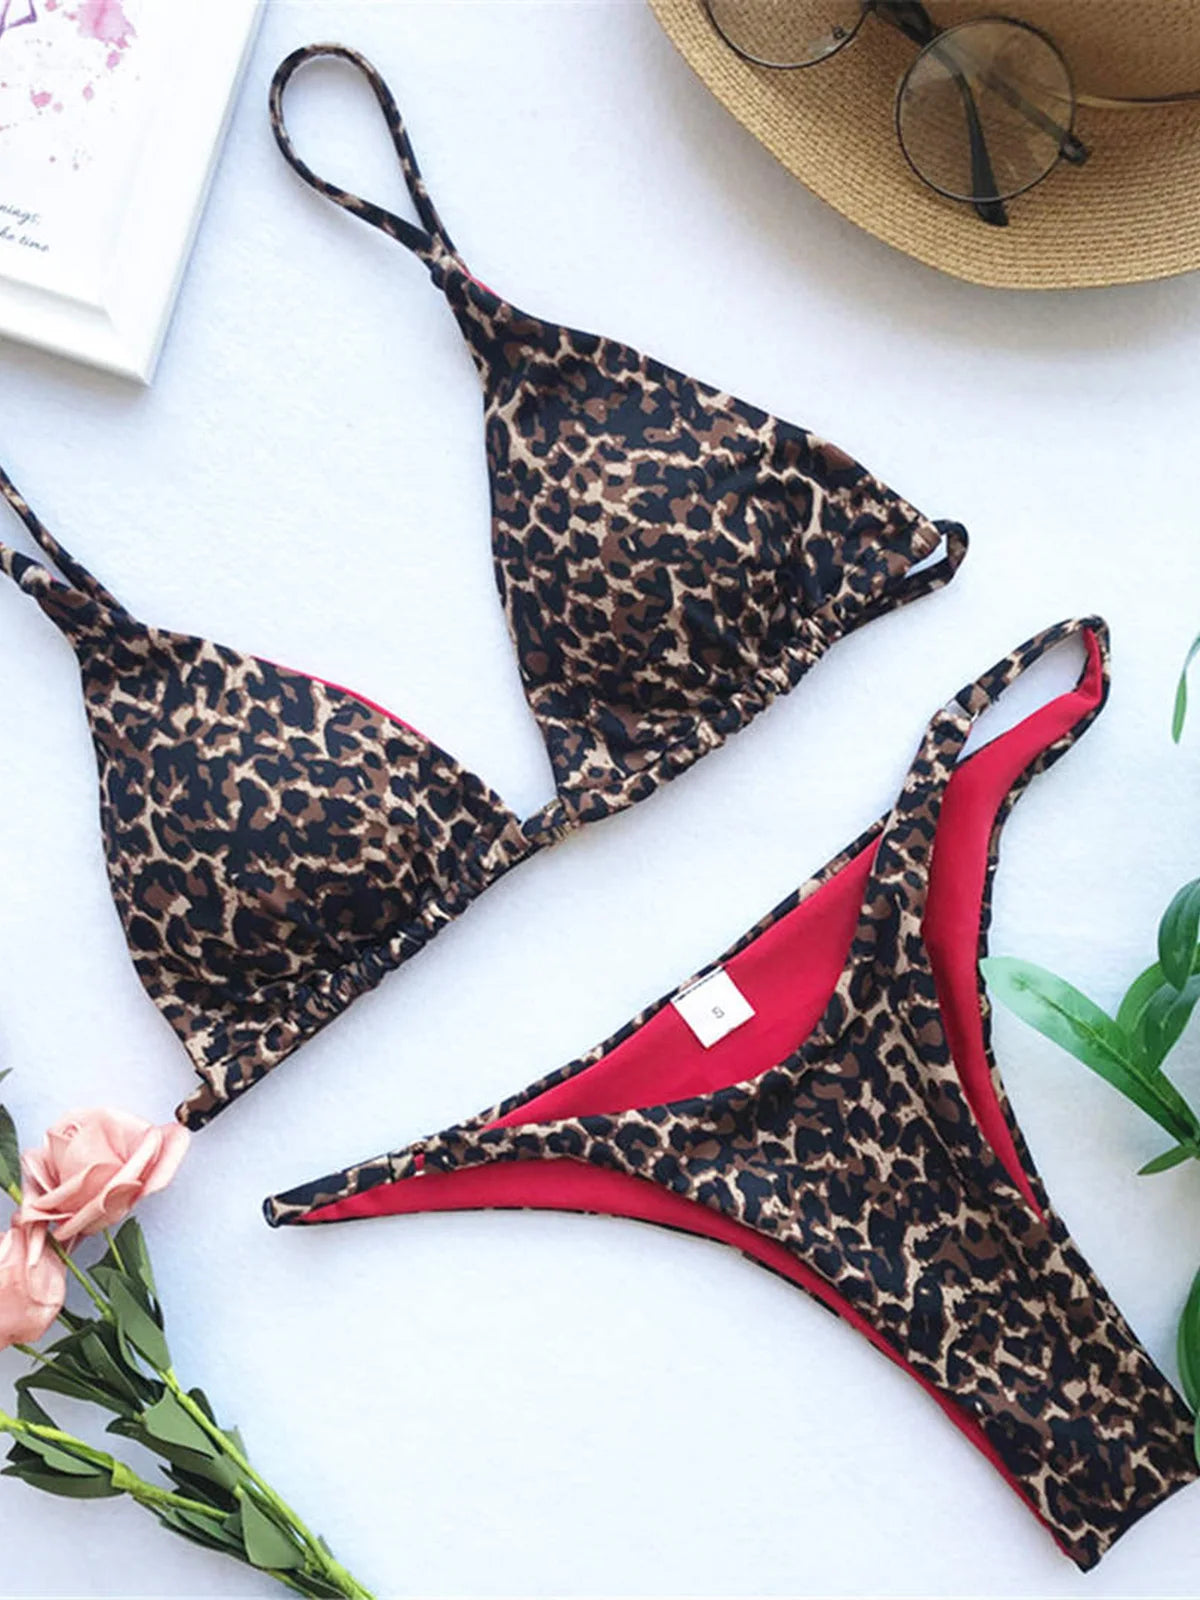 Fierce Leopard Brazilian Bikini Set, Trendy Two Piece Swimsuit for Women, Made with Comfortable Nylon and Spandex, Features Bold Leopard Print and Cheeky Brazilian Cut, Padded Wire Free Design that Fits True to Size, Unforgettable Beach Look in Leopard Print, Available in Small, Medium, Large Sizes, New and In Stock with Free Shipping